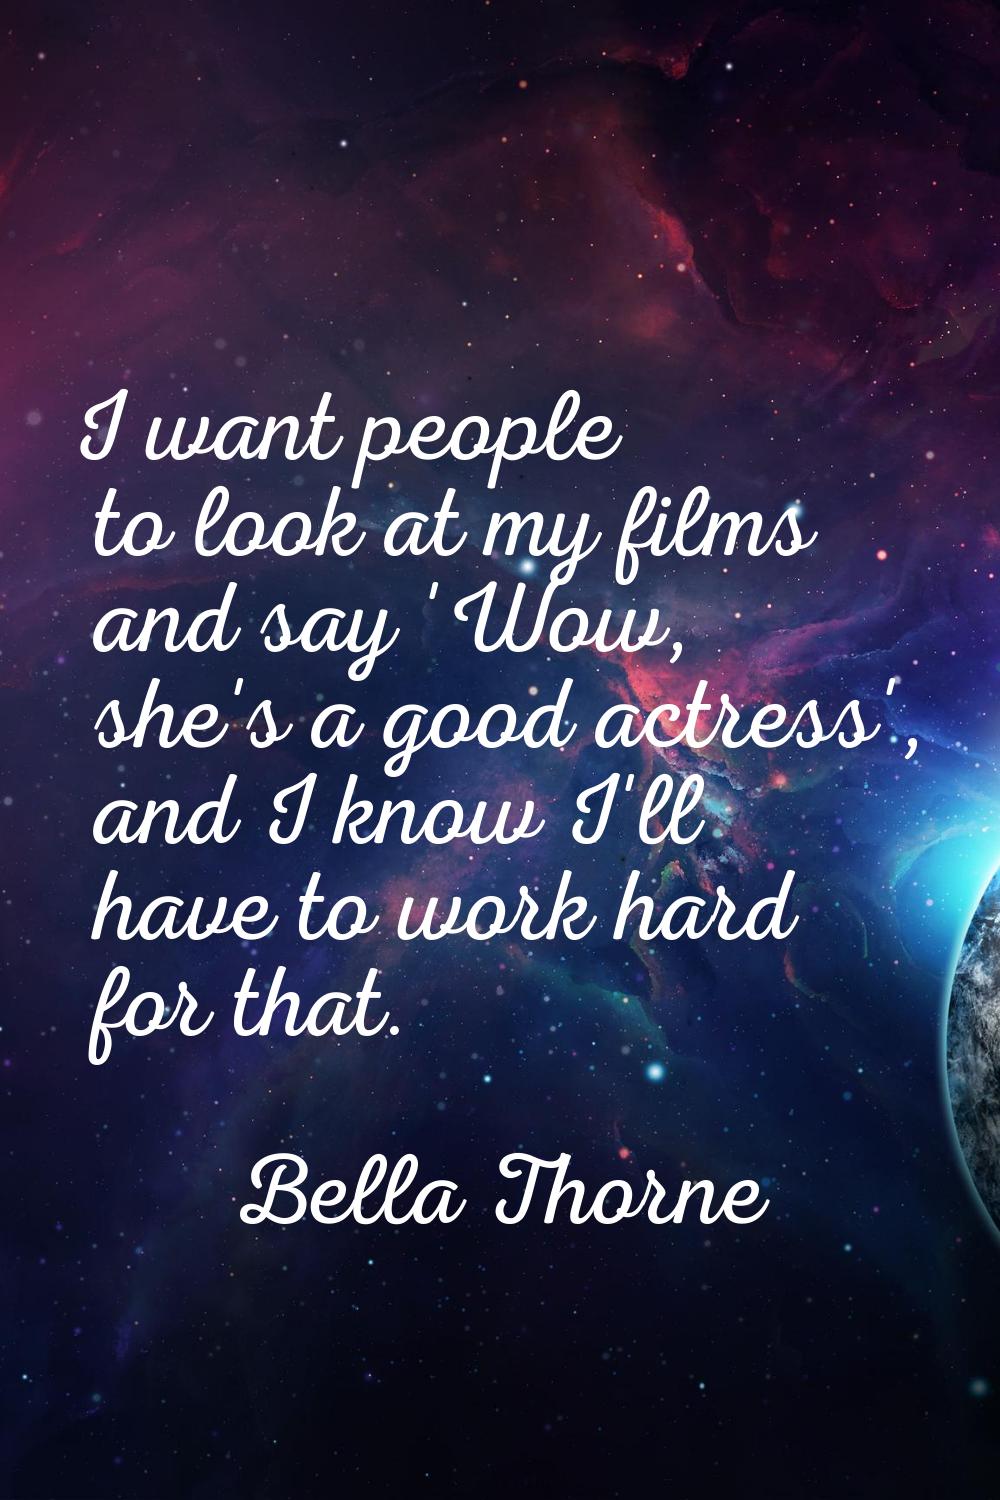 I want people to look at my films and say 'Wow, she's a good actress', and I know I'll have to work